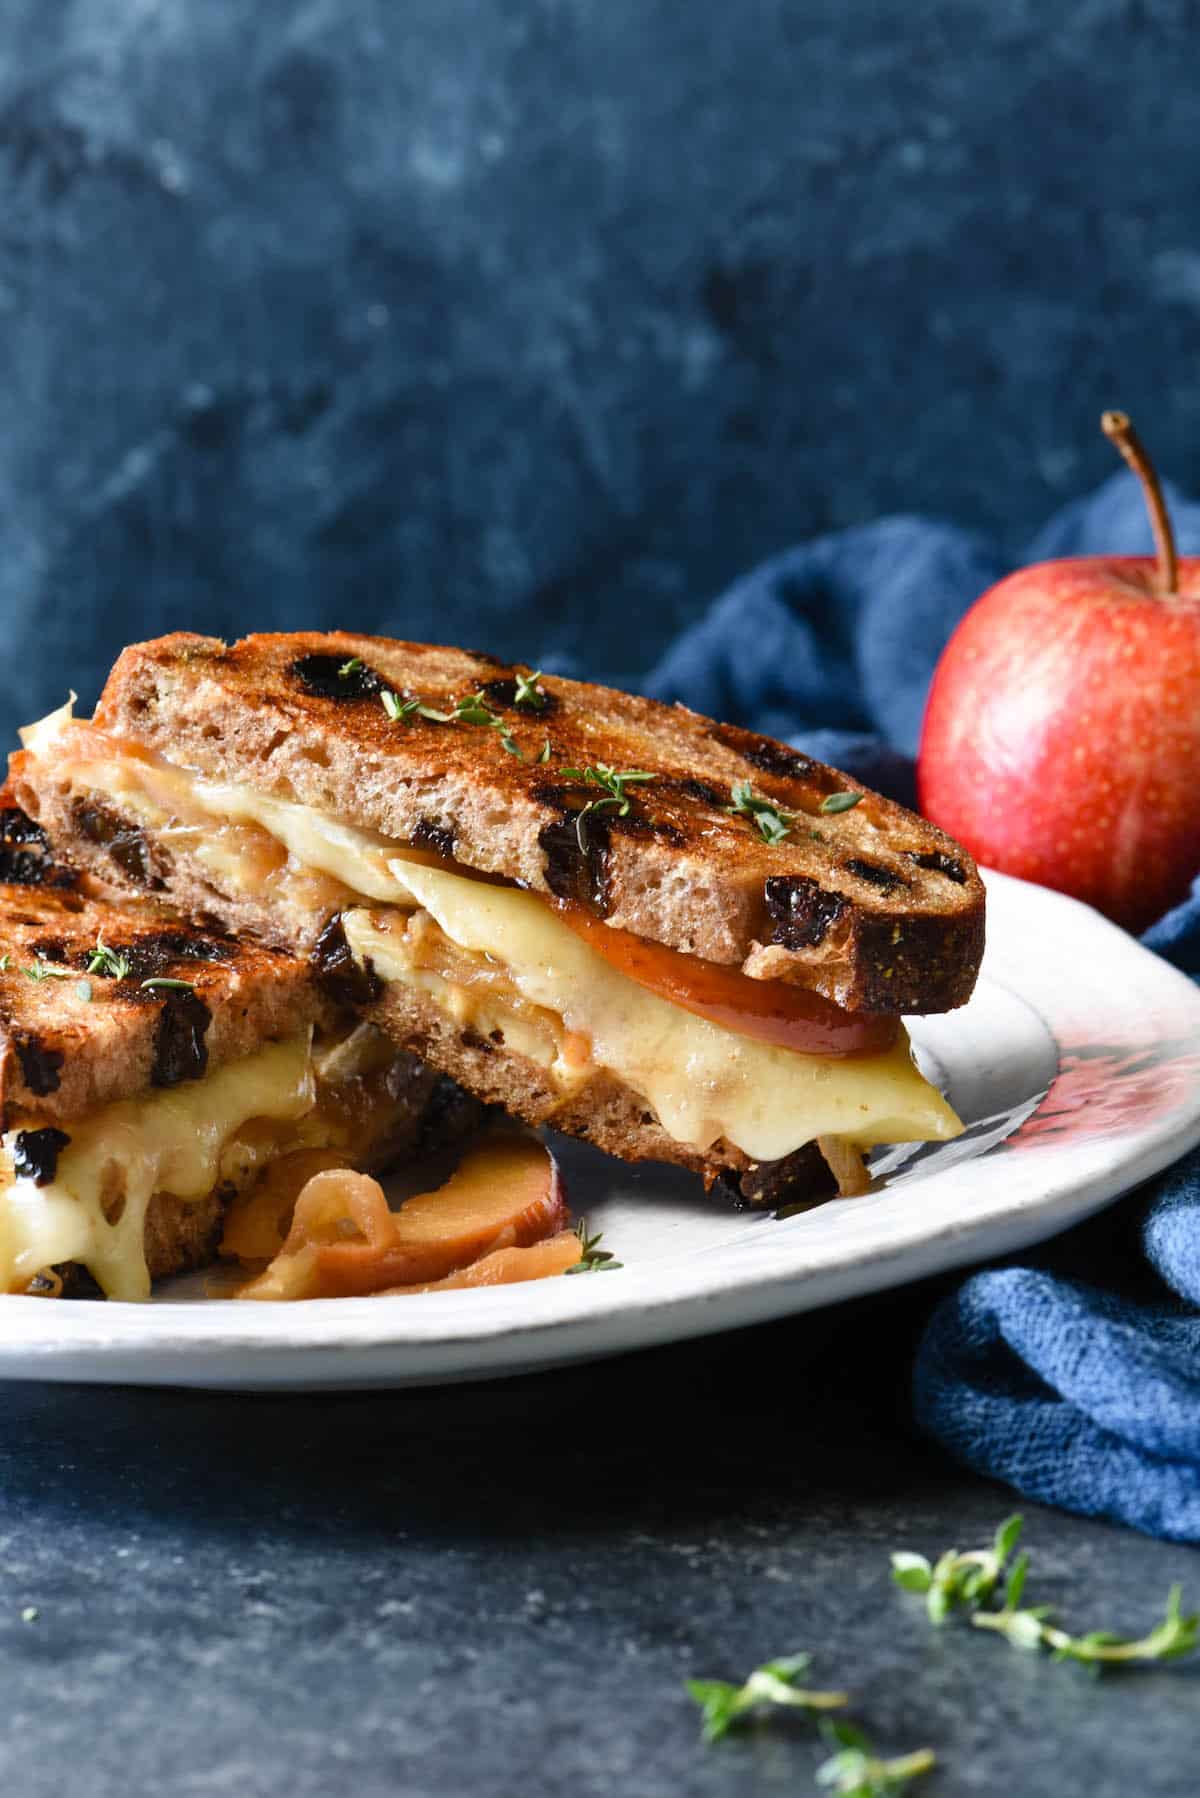 This Apple Grilled Cheese is an irresistible combination of sautéed apples, sweet caramelized onions, brie and white cheddar cheeses, Dijon mustard and walnuts. It's the best toasted sandwich you've ever made at home! | foxeslovelemons.com